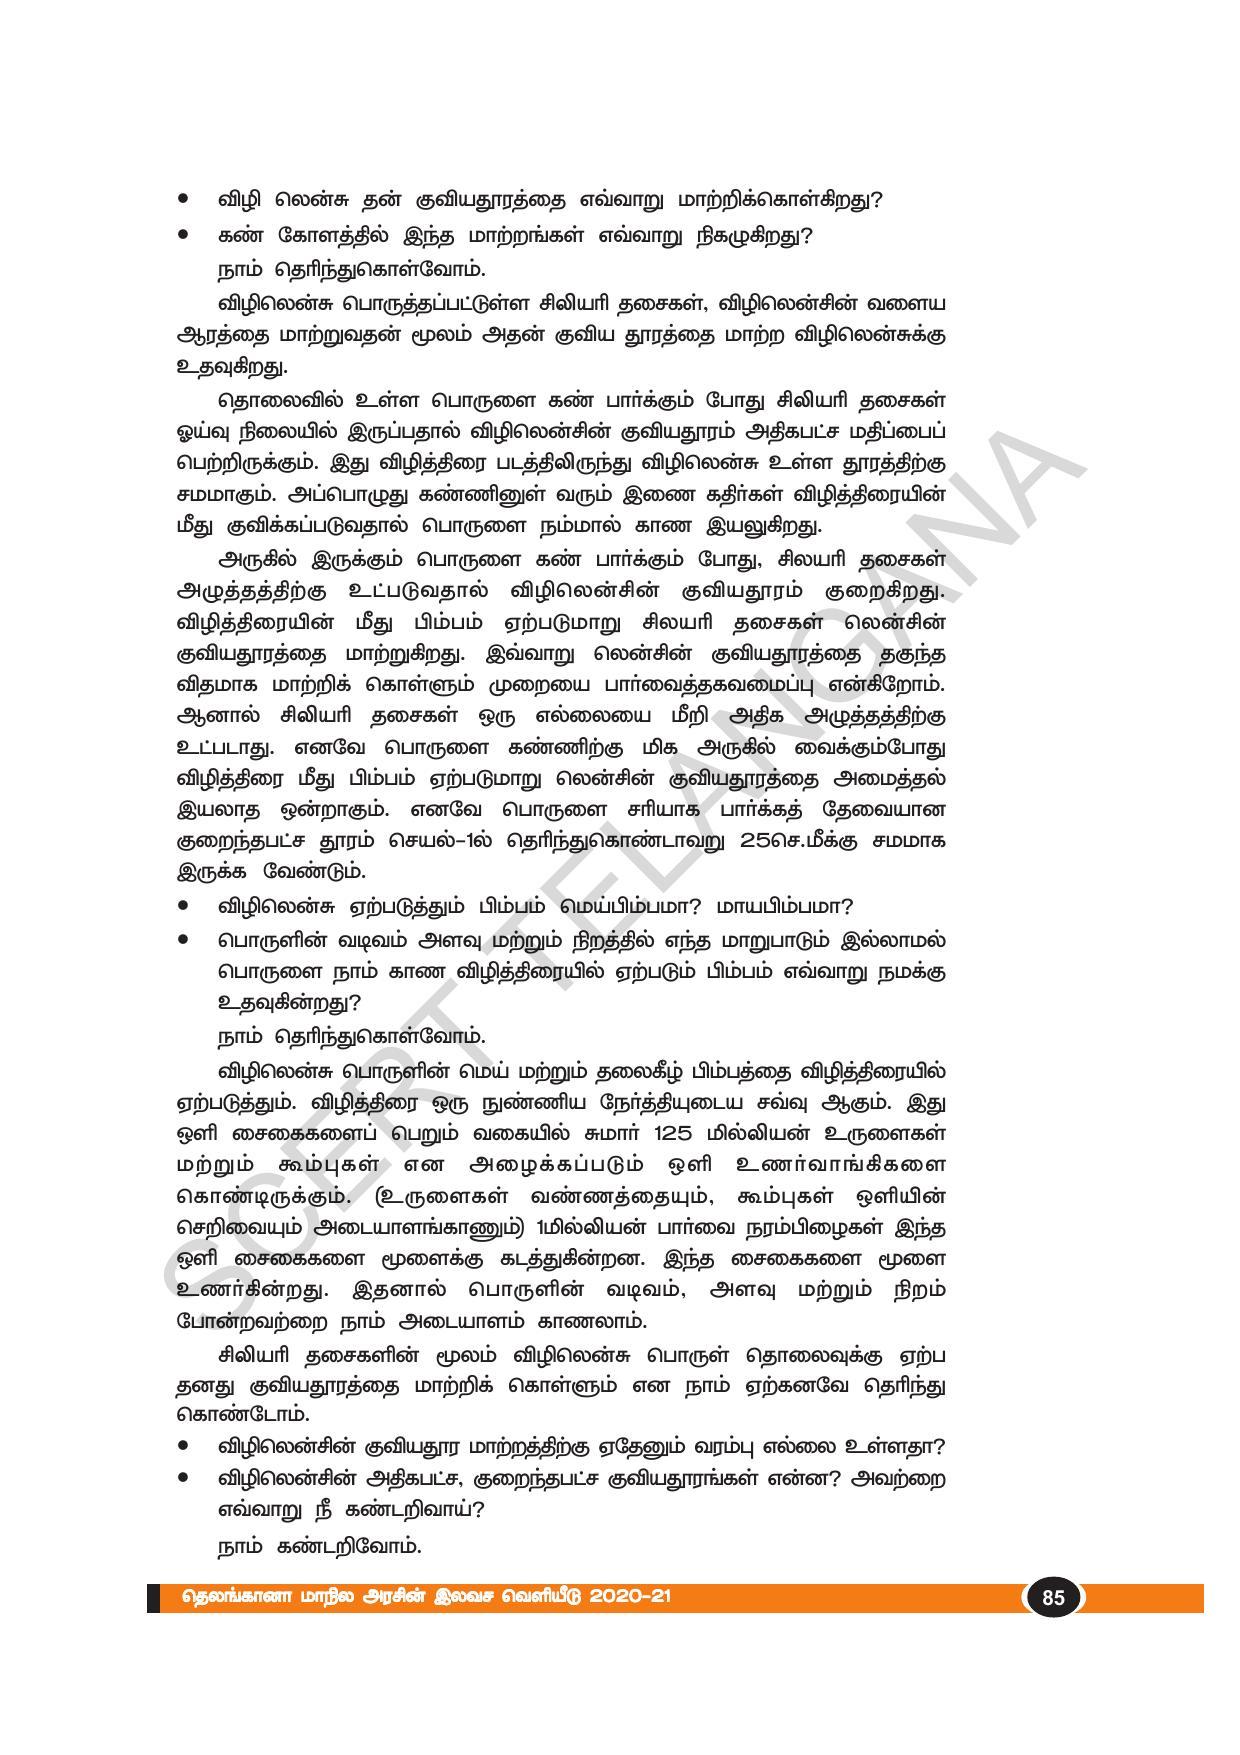 TS SCERT Class 10 Physical Science(Tamil Medium) Text Book - Page 97